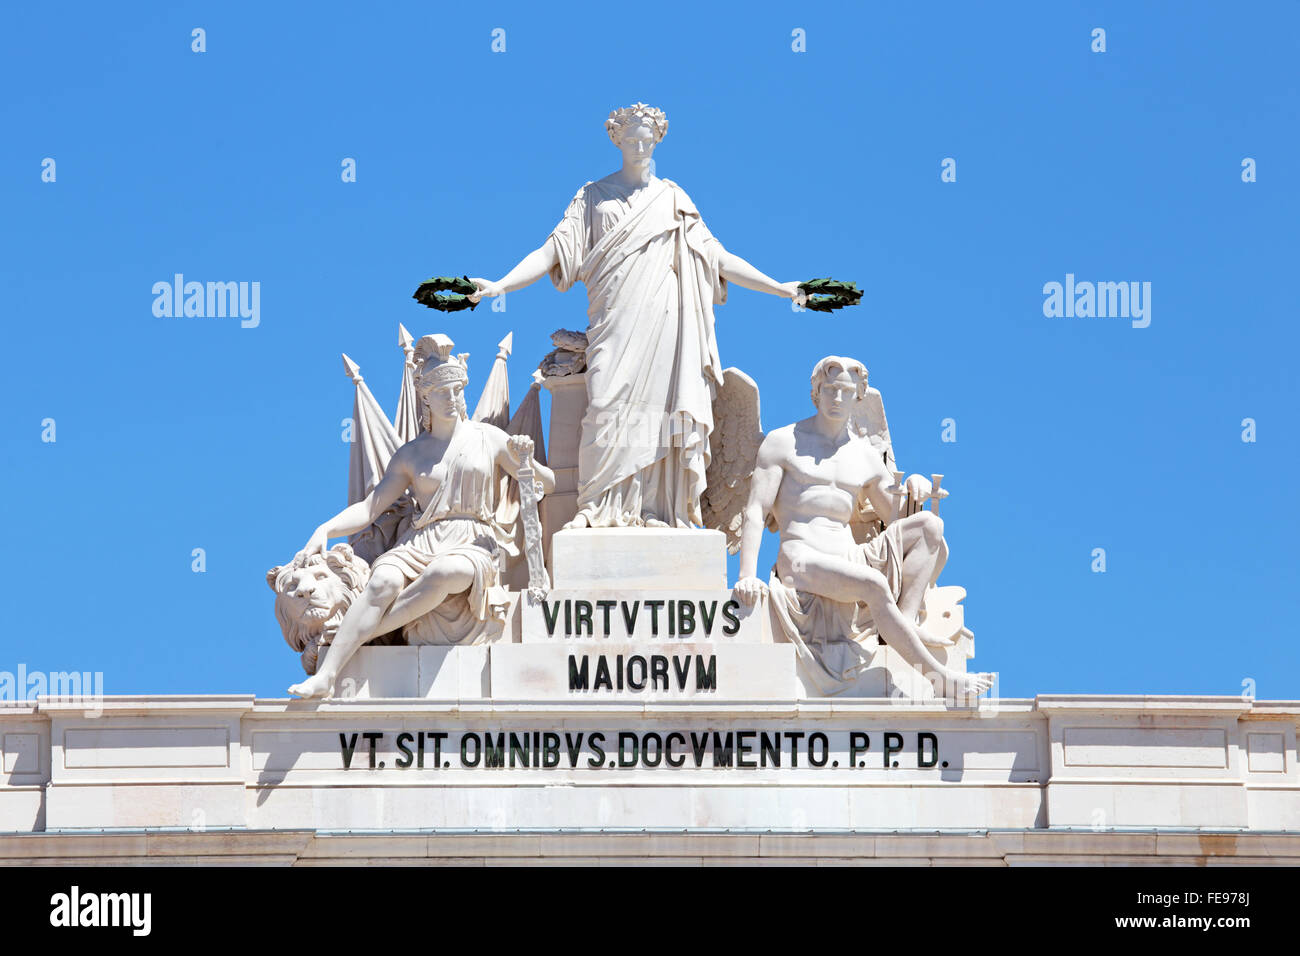 Statues at the top of Rua Augusta Arch in Lisbon, Portugal. Allegory of Glory rewarding Valor and Genius. Stock Photo